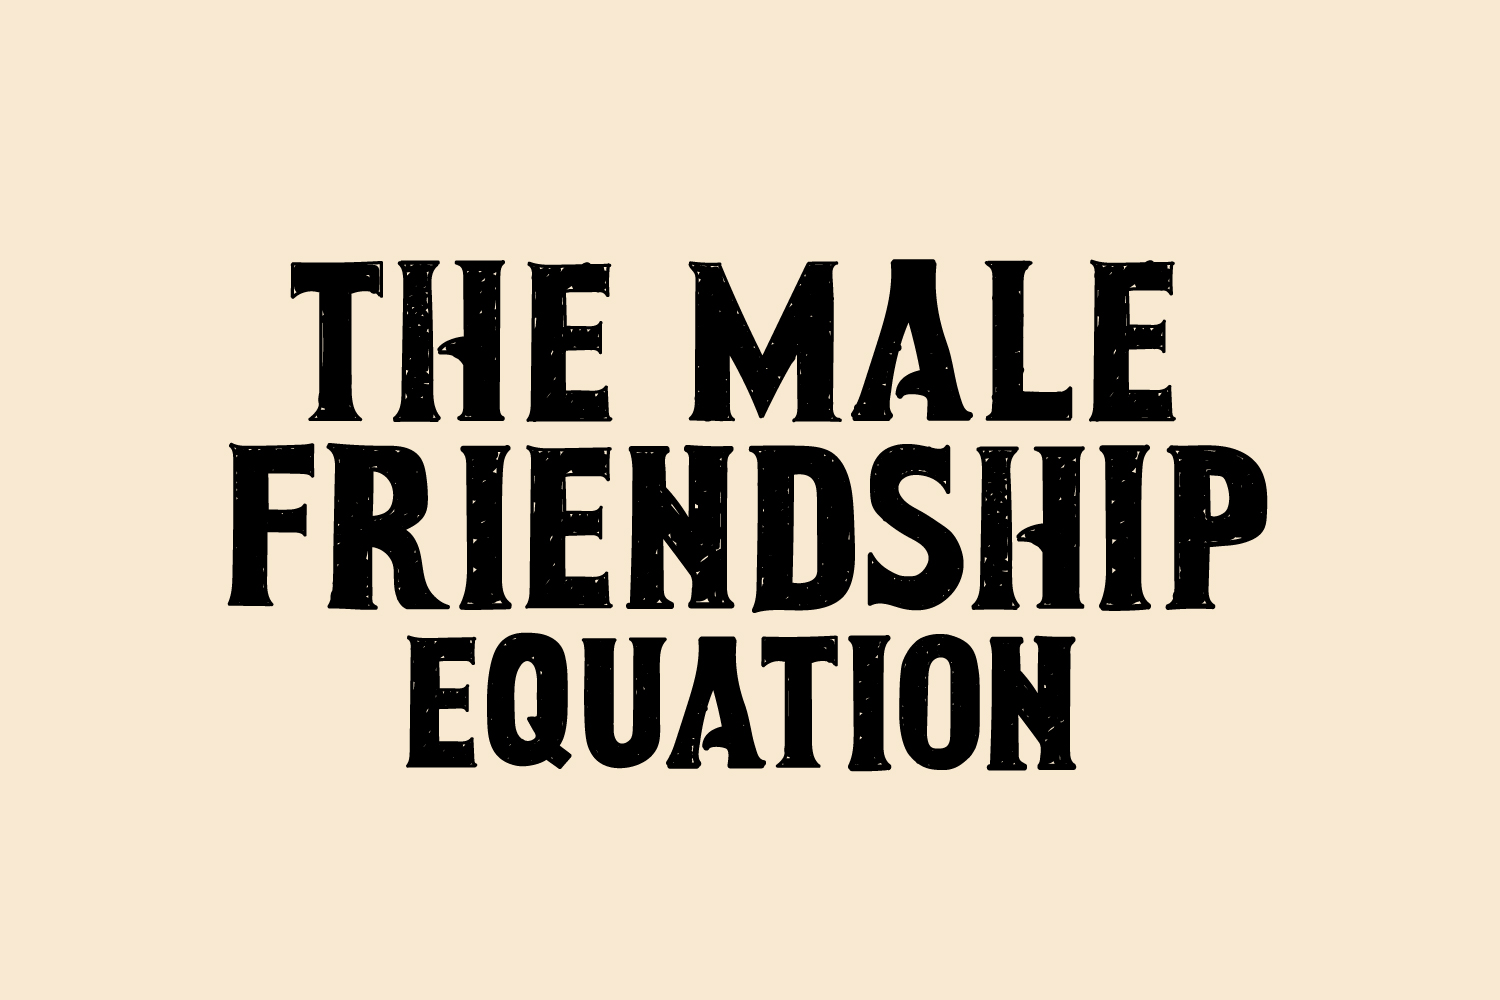 The Male Friendship Equation: Stories, Interviews and Advice During an “Epidemic of Loneliness”